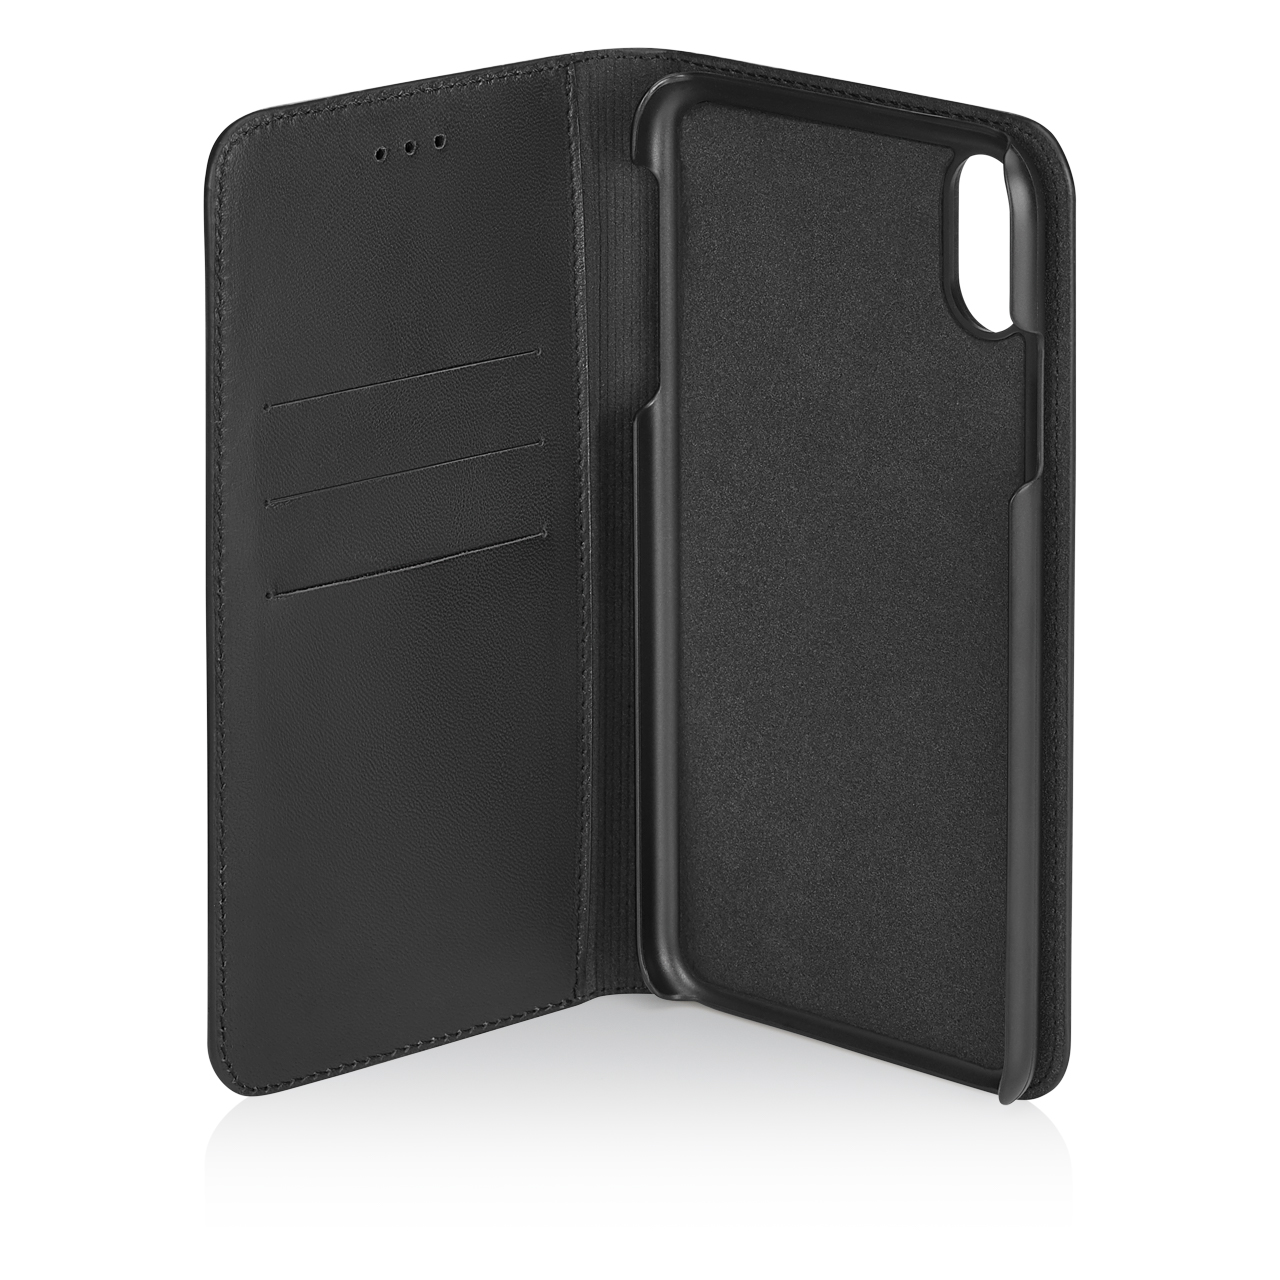 Leather Flip Case Fit for iPhone Xs Max Gray Wallet Cover for iPhone Xs Max 